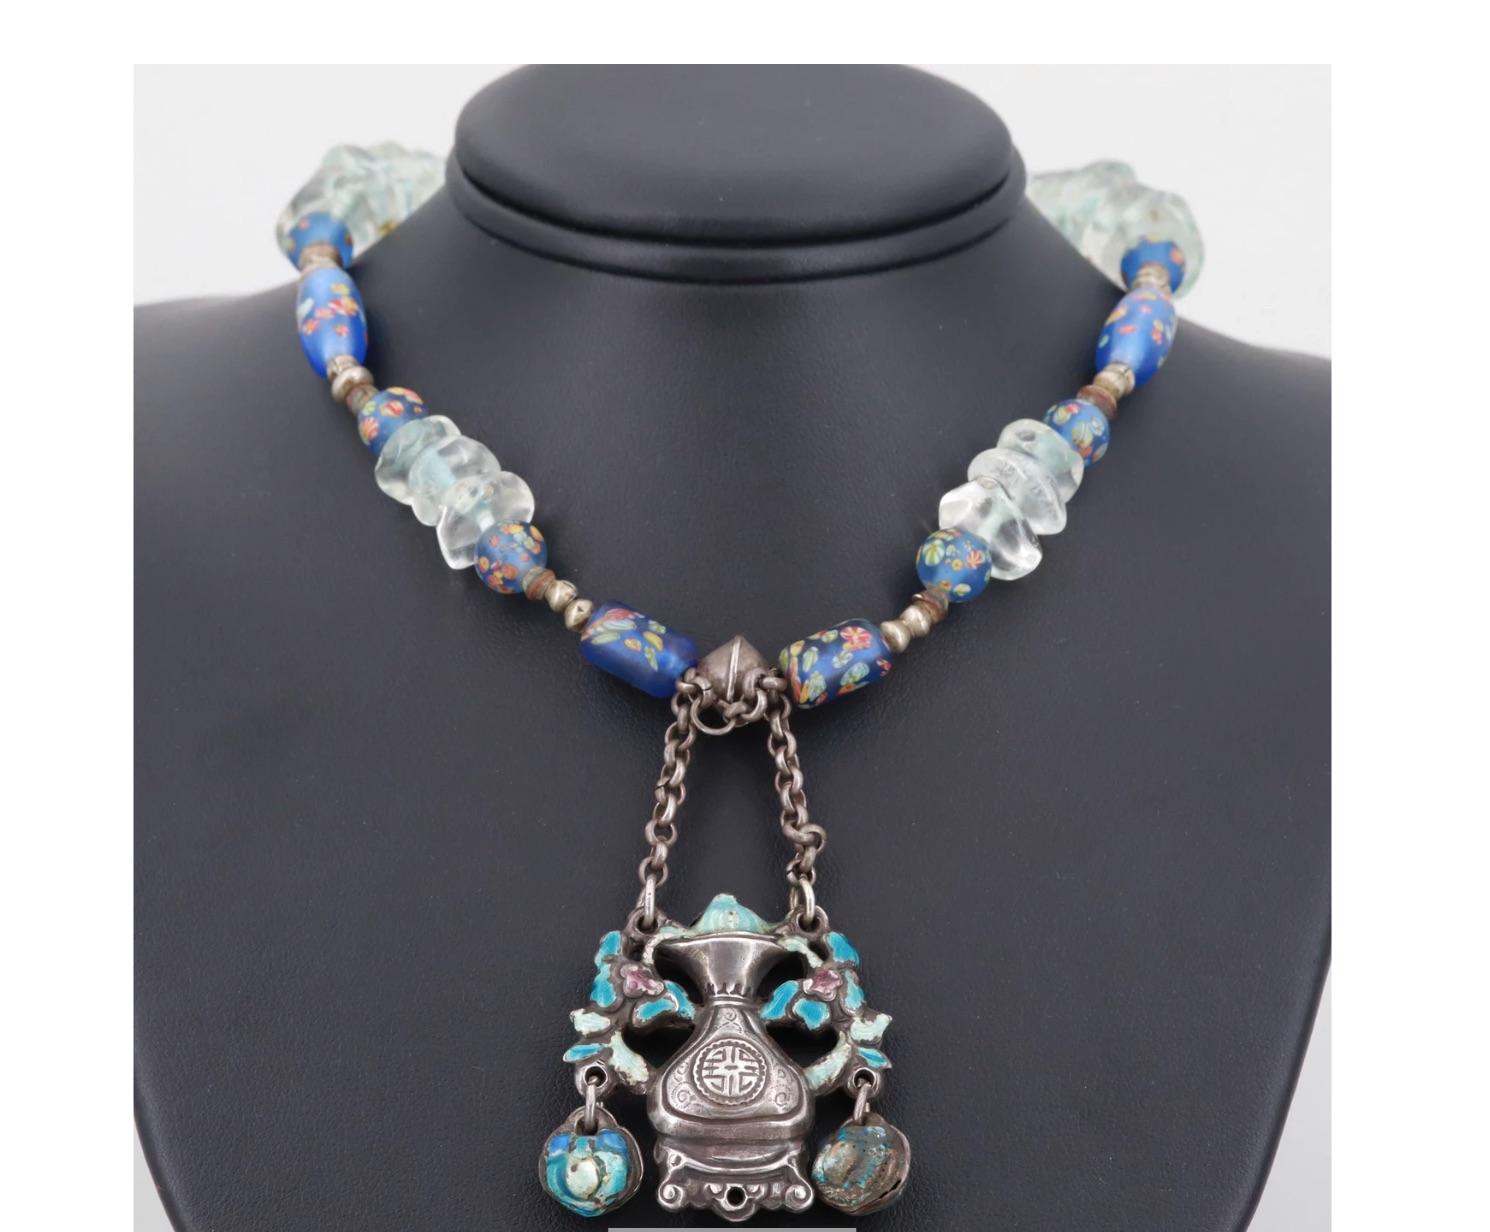 A most unusual rare Inspired vintage early 20th century or before, Asian Silver Pendant Necklace. It is a statement necklace, head turner!

Incredibly Beautiful Fashionable Necklace with Rock Crystal Quartz Beads, Enameled Glass Beads, silver beads,